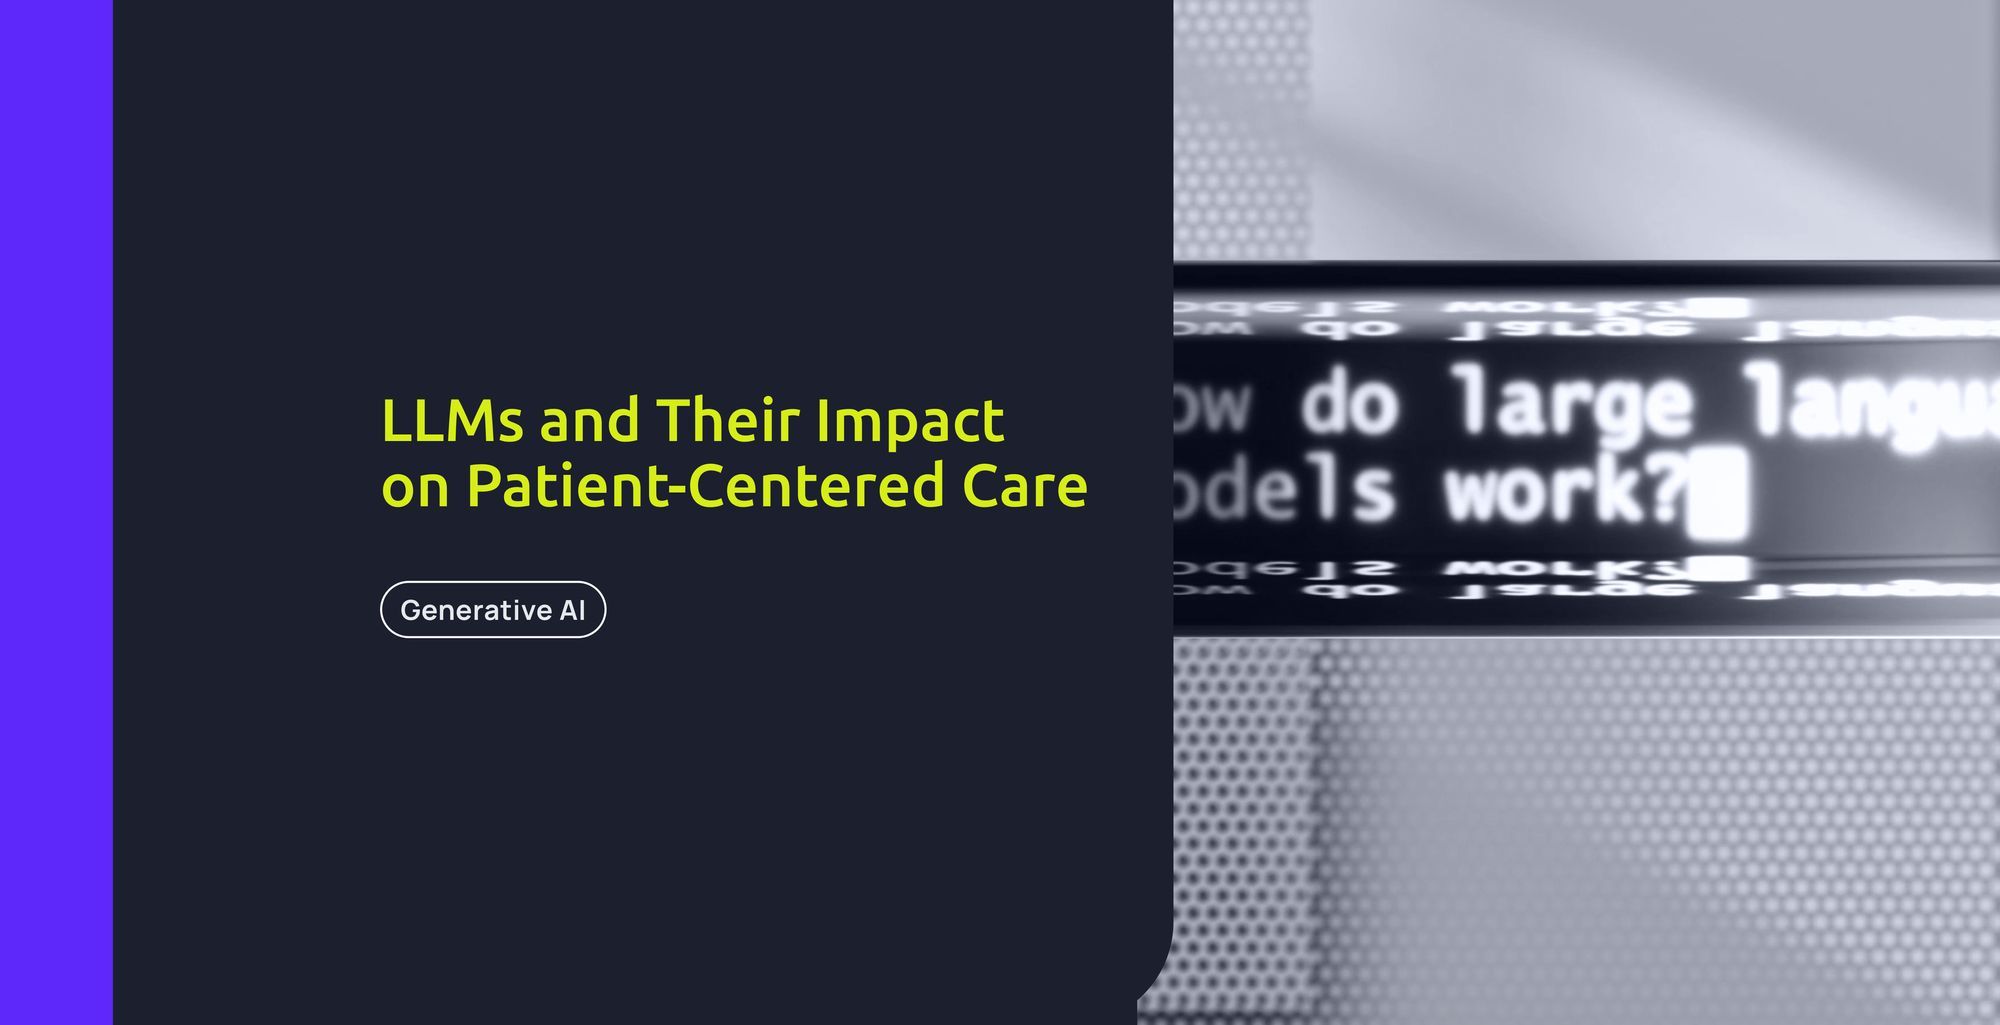 LLMs and Their Impact on Patient-Centered Care